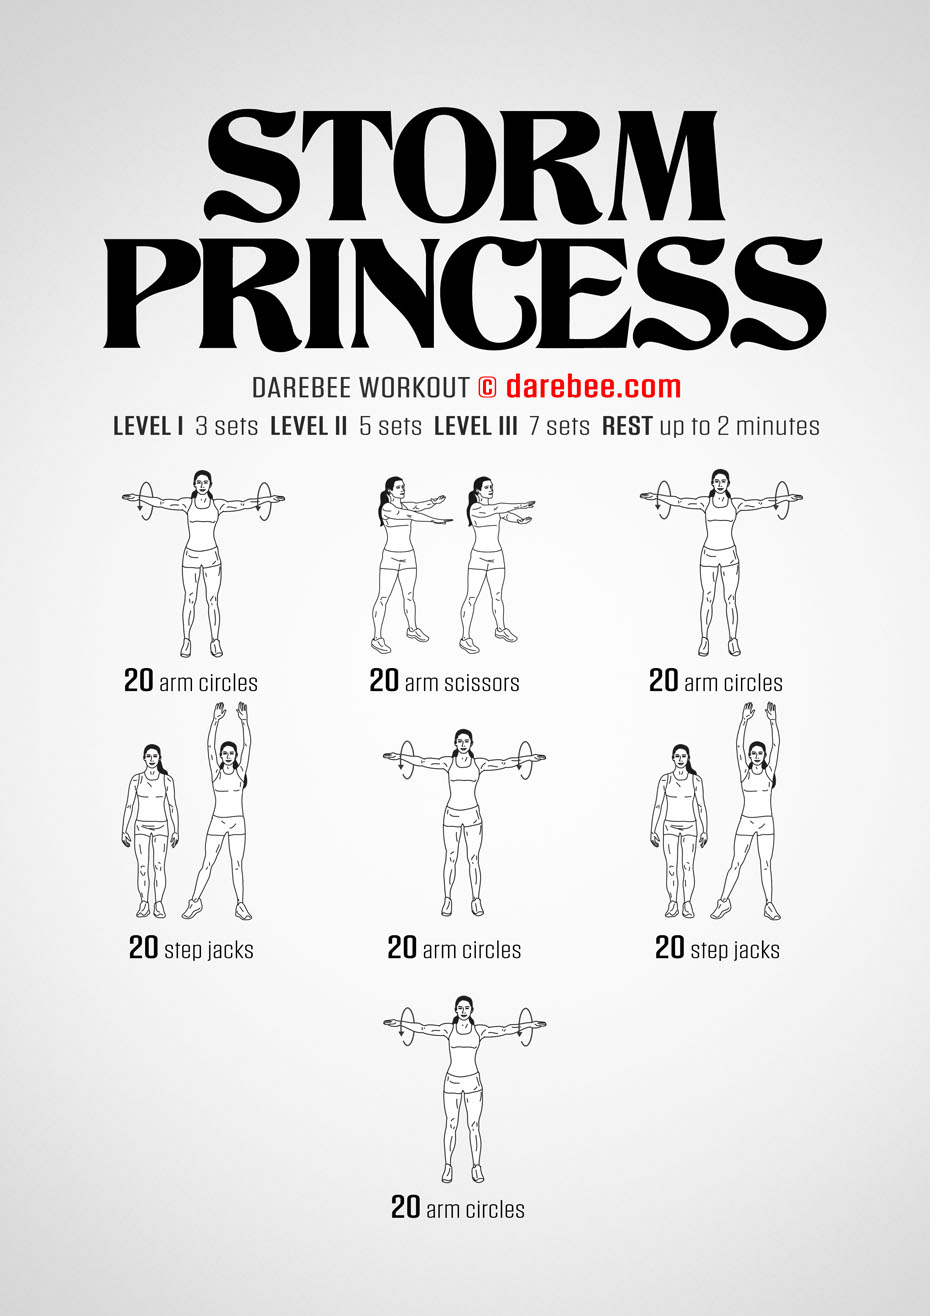 Storm Princess is a Darebee home-fitness cardiovascular workout that will raise your body temperature and increase your breathing rate without emptying your batteries.